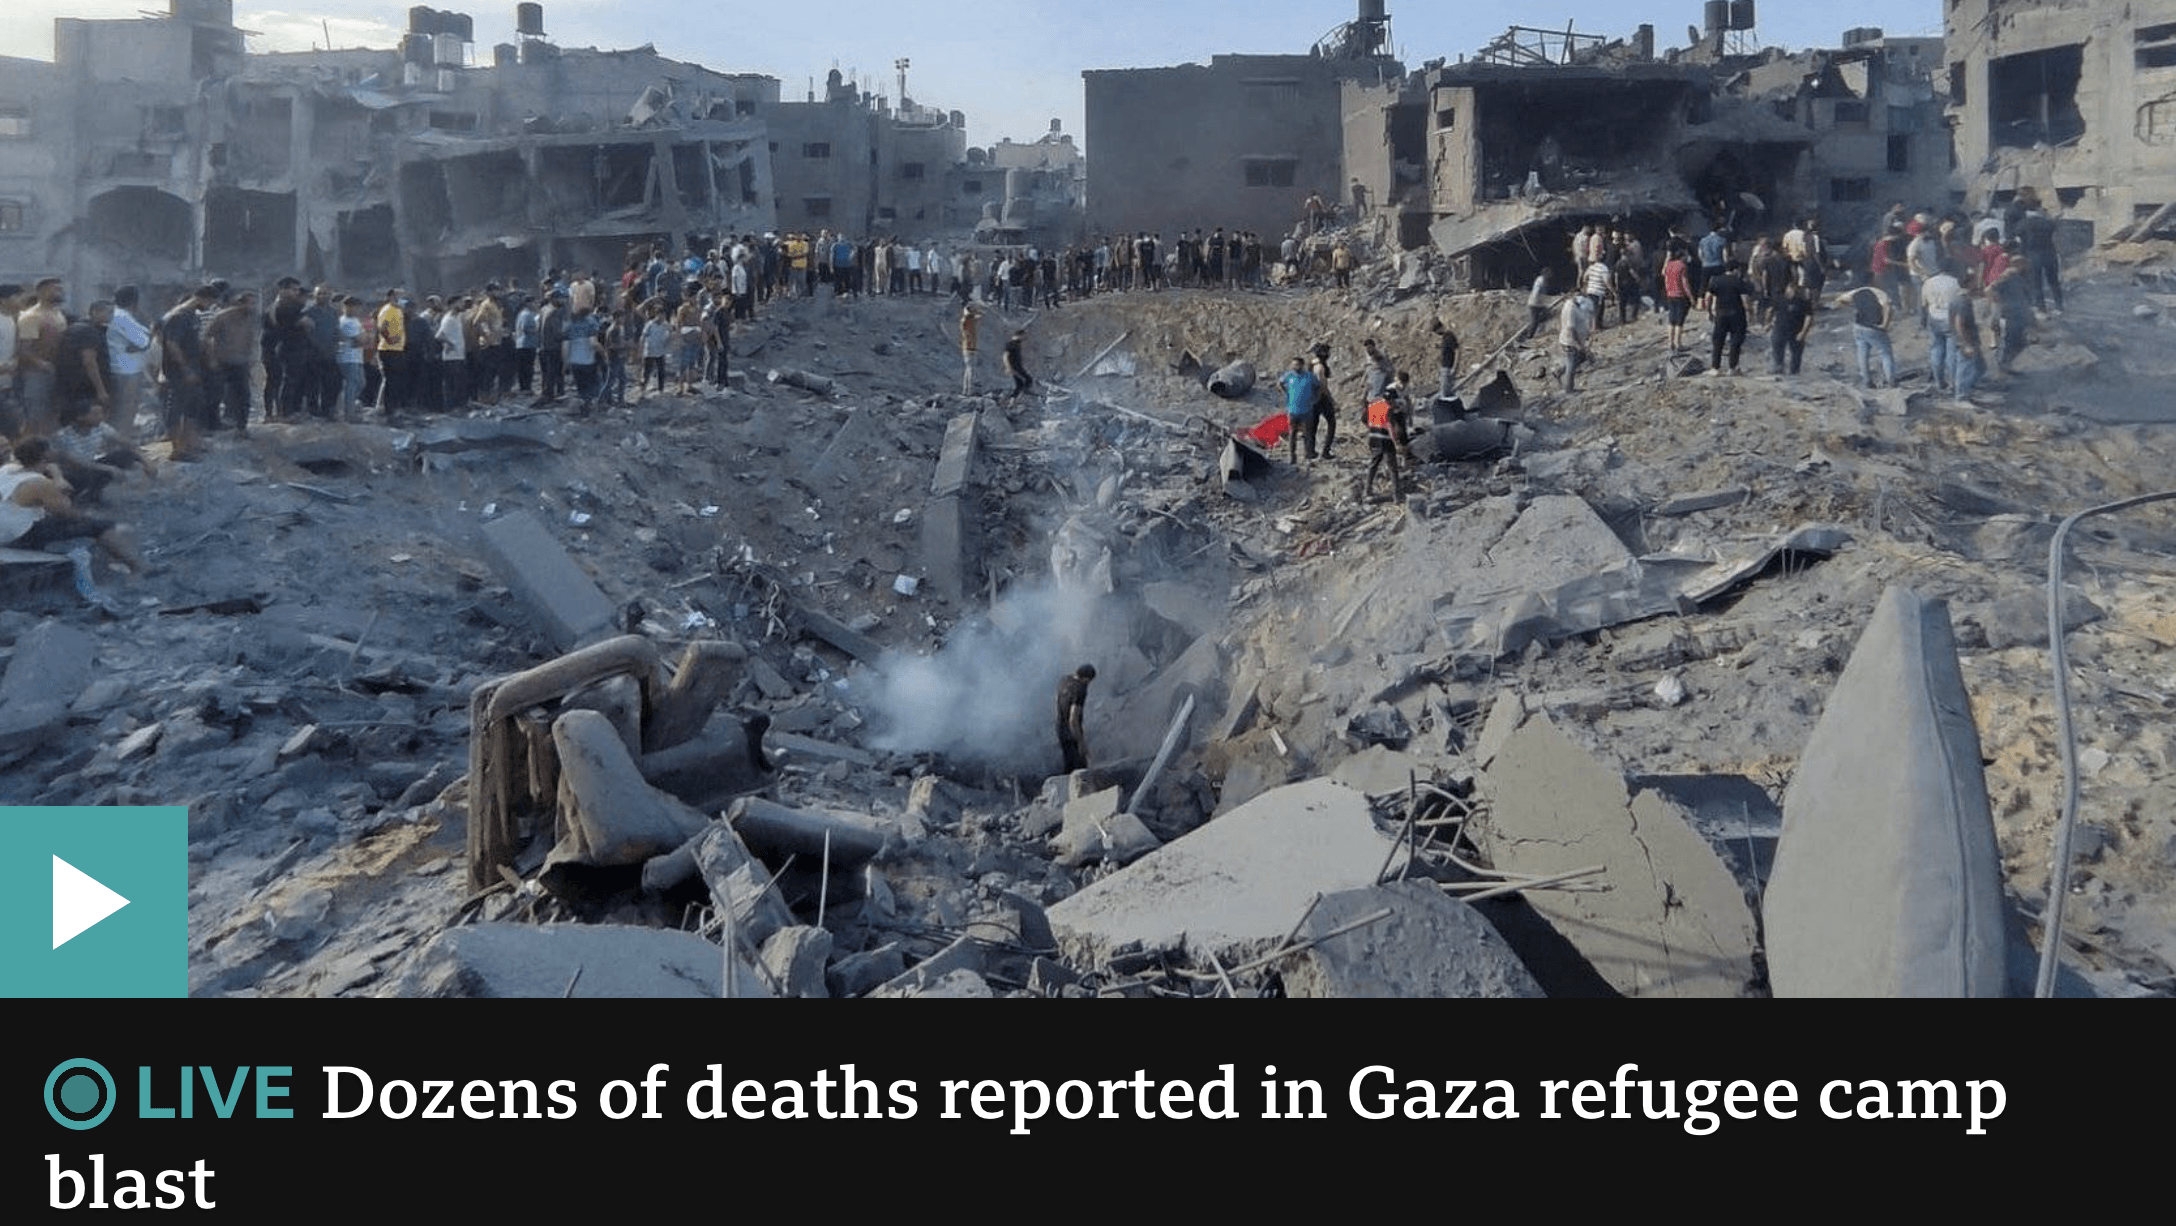 INTERNATIONAL LAW SUBVERTED: Israel caused carnage in its bombing of the Jamalia refugee camp